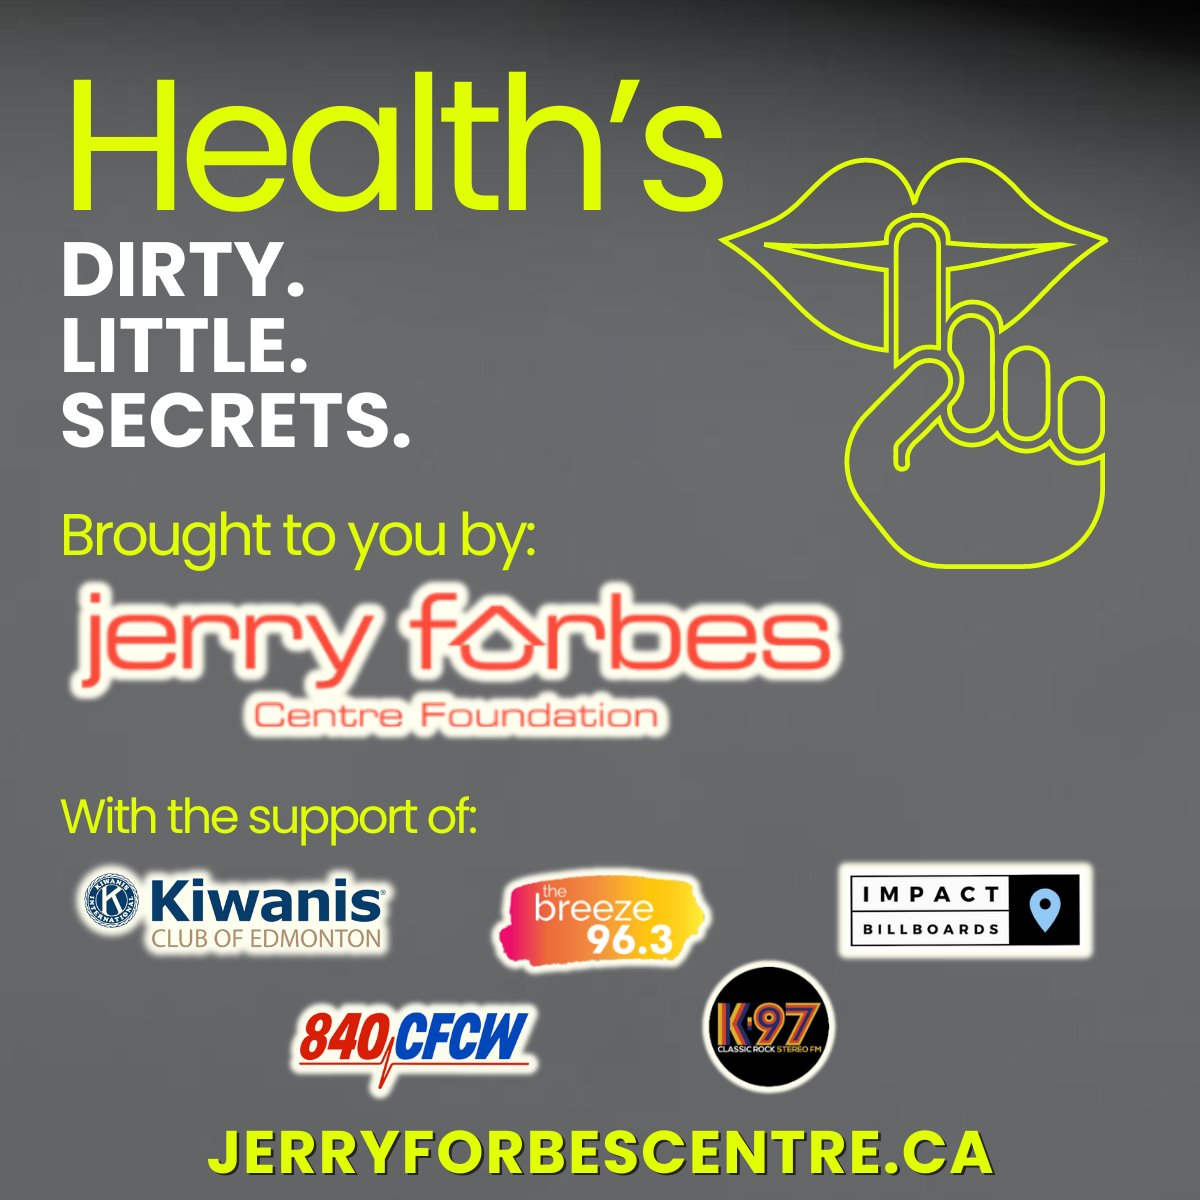 FREE event, Apr. 13, Health's Dirty Little Secrets, recommended for ages 40+. Uncomfortable health topics that MUST be talked about! 11am - 3pm, @JerryForbesCntr, & a free bbq lunch. Pls register: bitly.ws/3hnGf @prostatealberta The MAN VAN will be here!